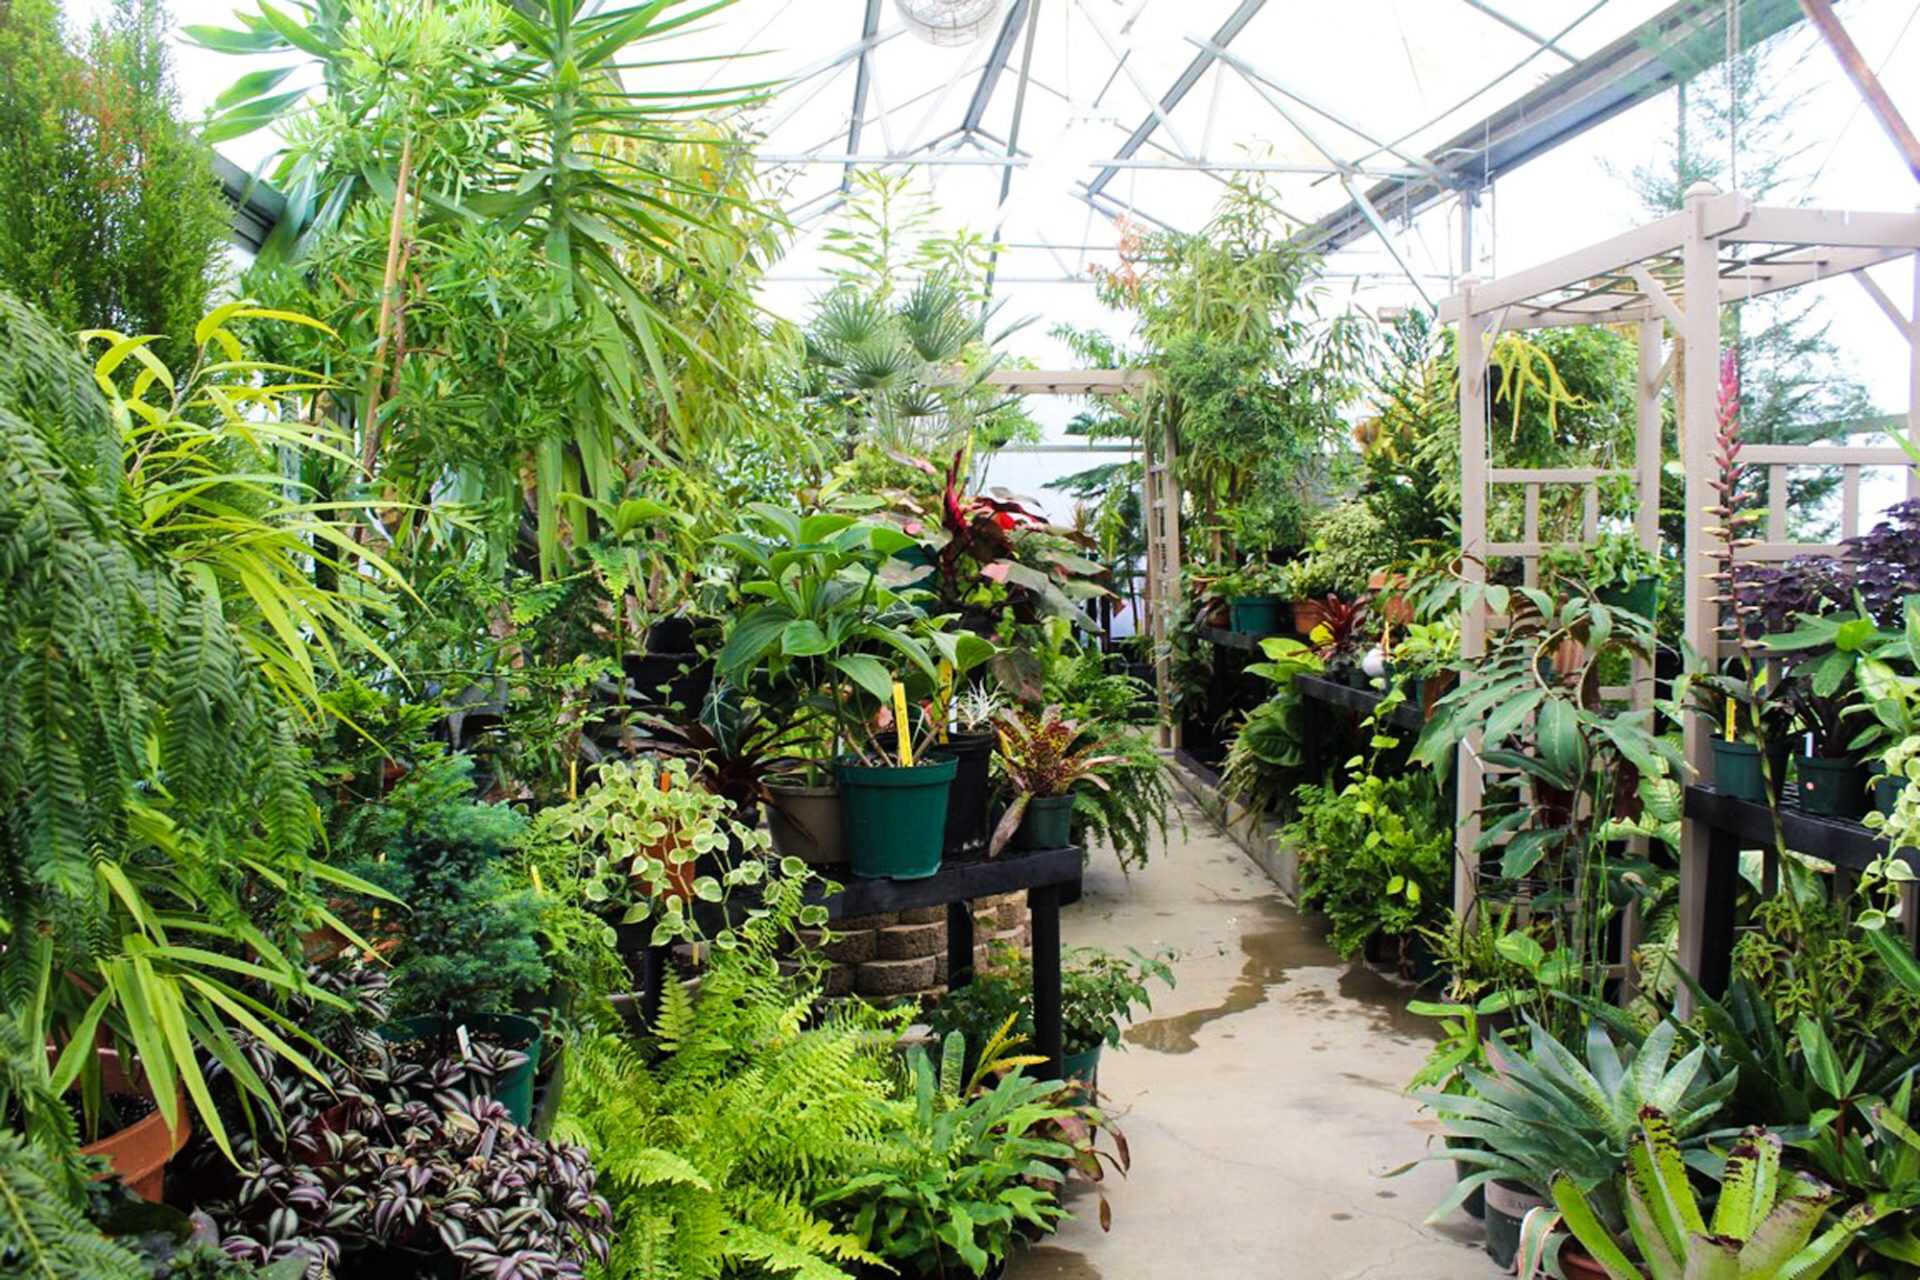 The+Appalachian+State+Biology+Greenhouse+is+located+off+of+State+Farm+Road.+Its+conservatory+contains+over+900+plant+species.+